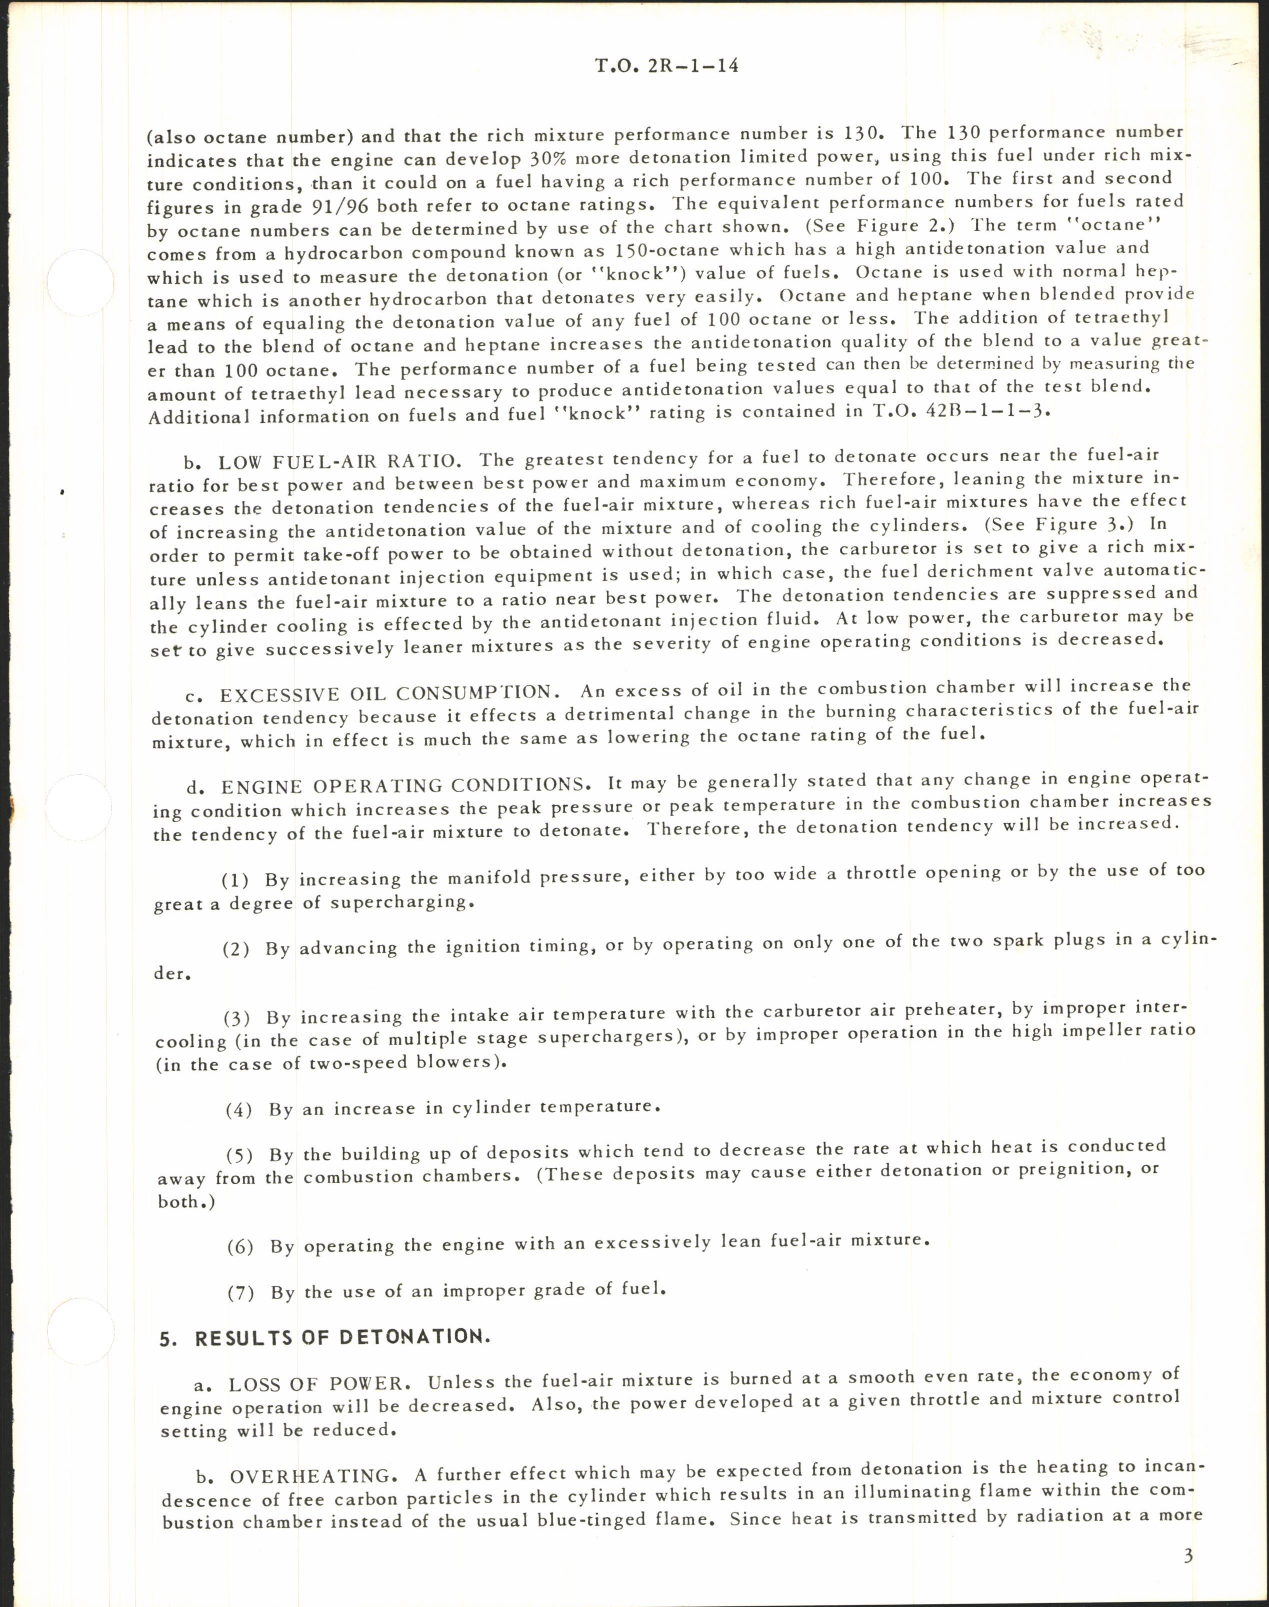 Sample page 3 from AirCorps Library document: Detonation in Aircraft Engines